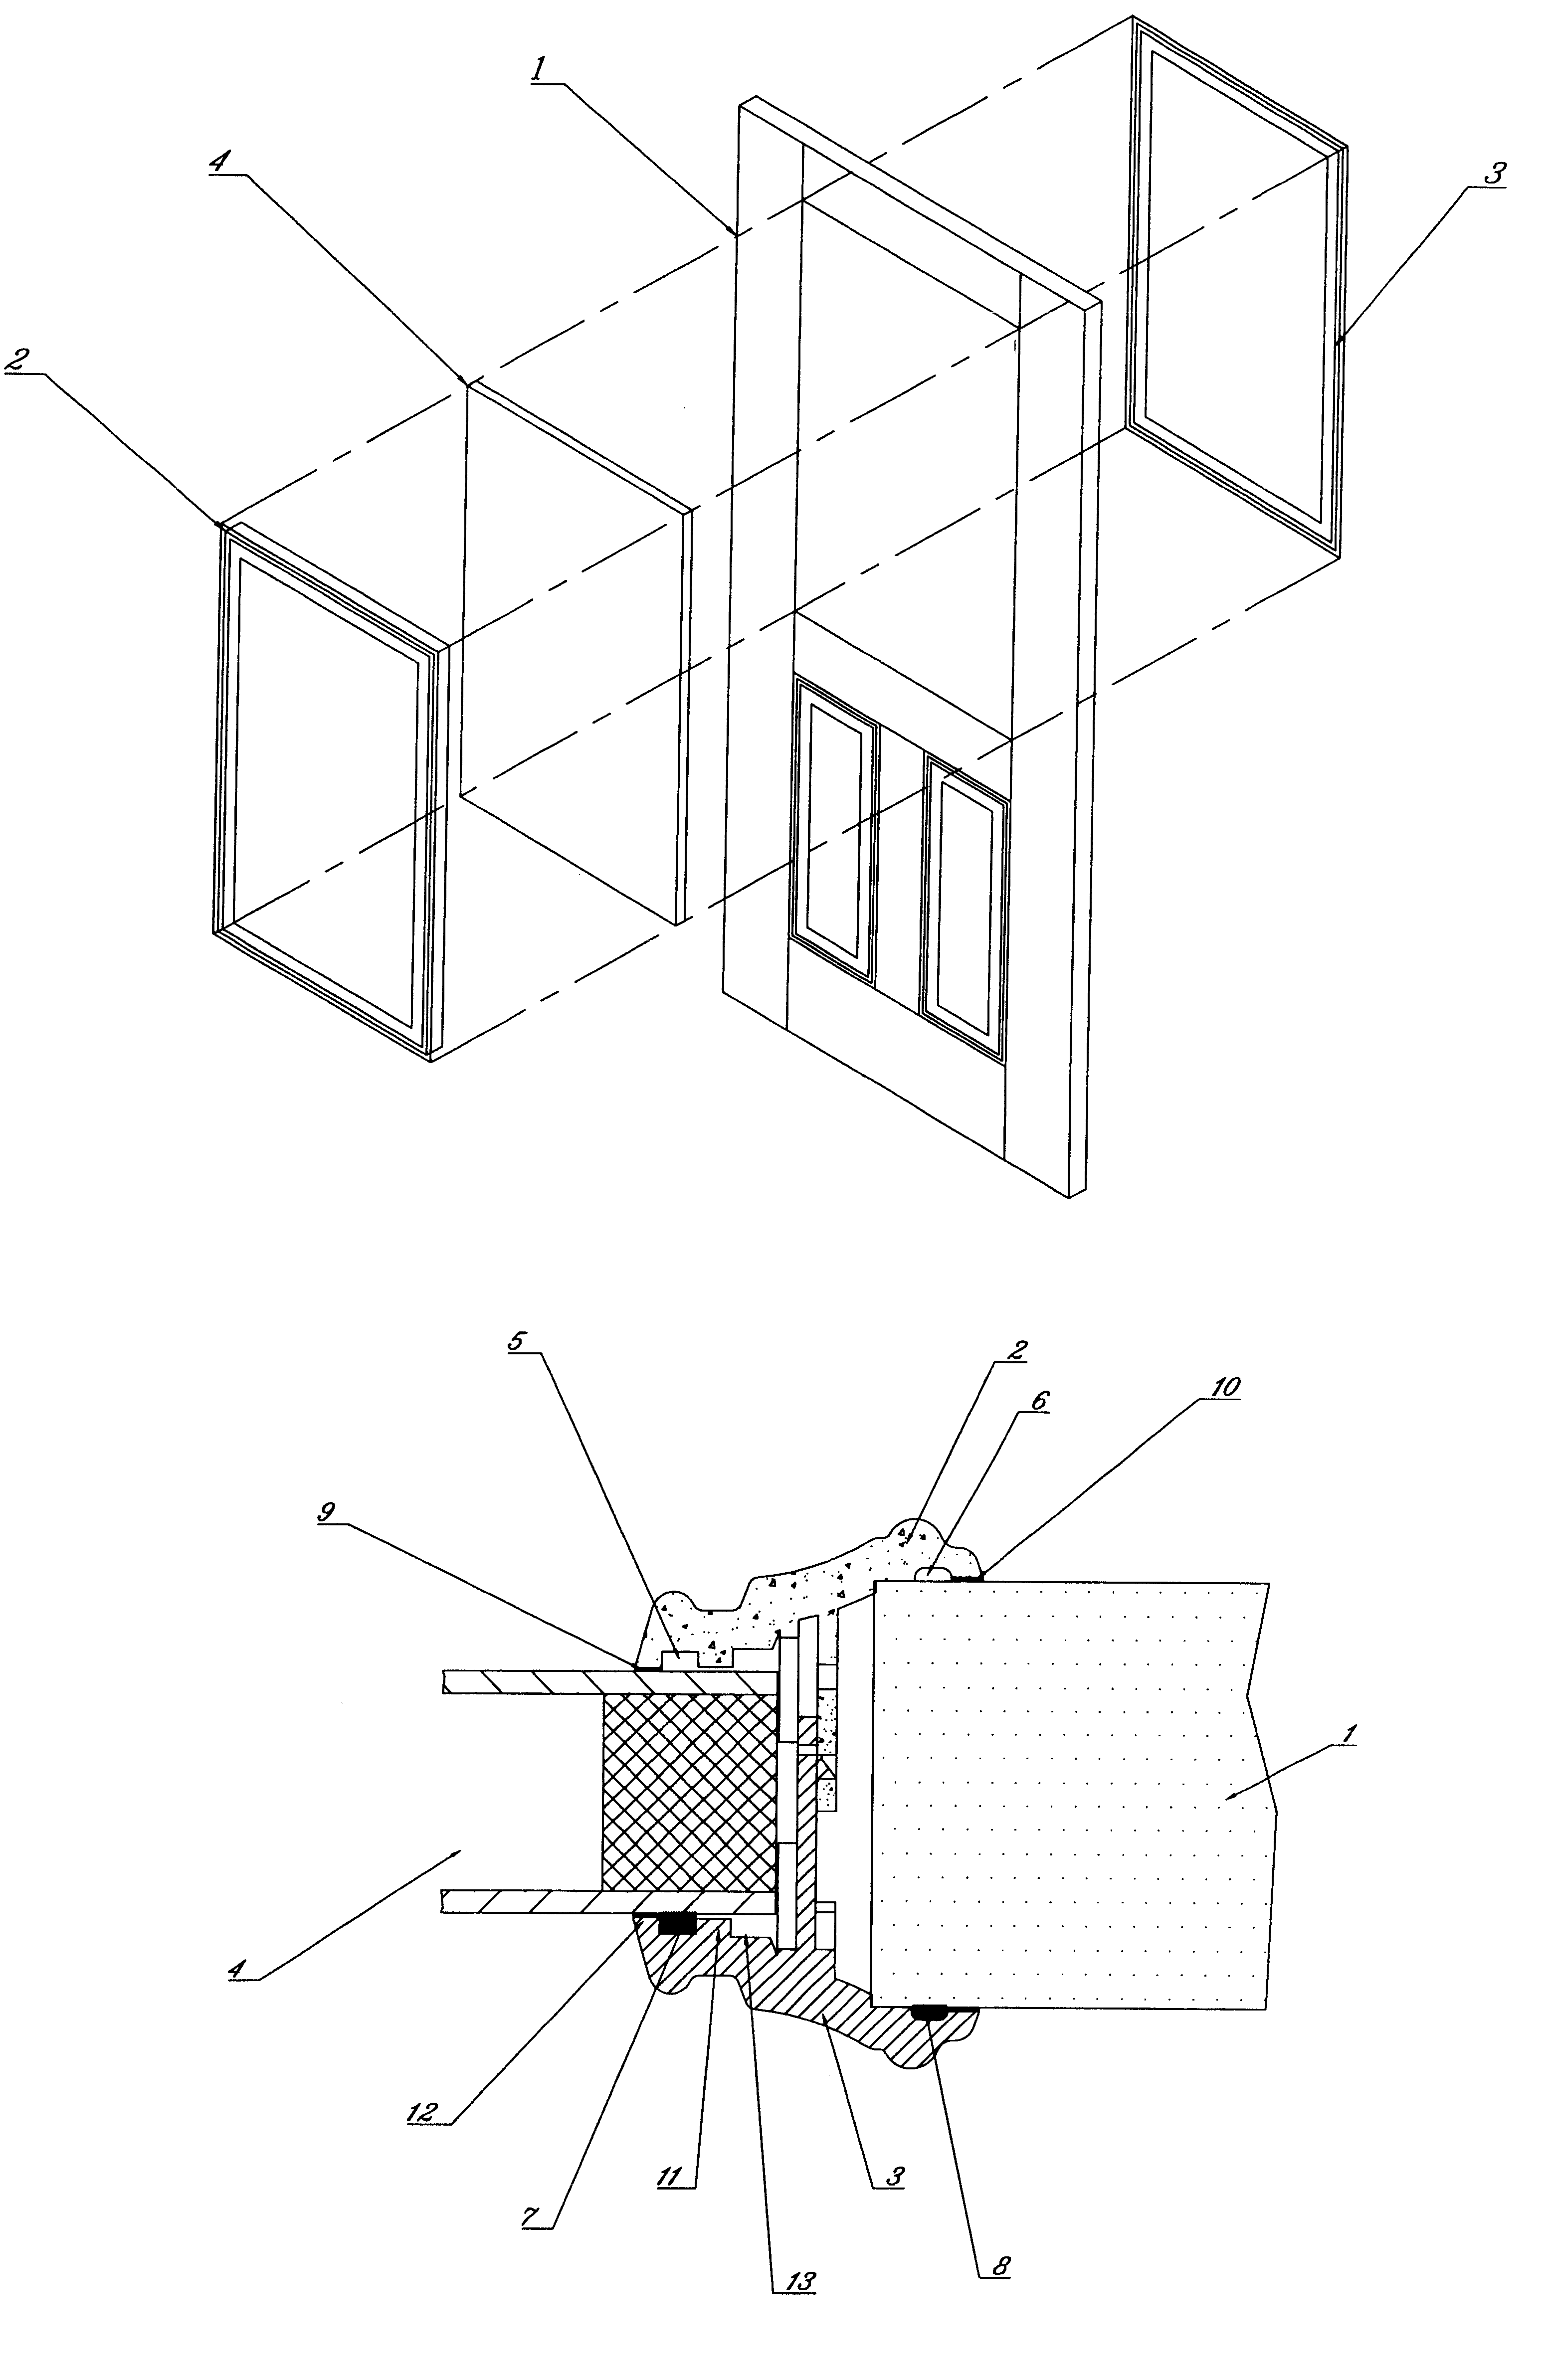 Opposite inserted structure for injecting frame of door leaf with glass